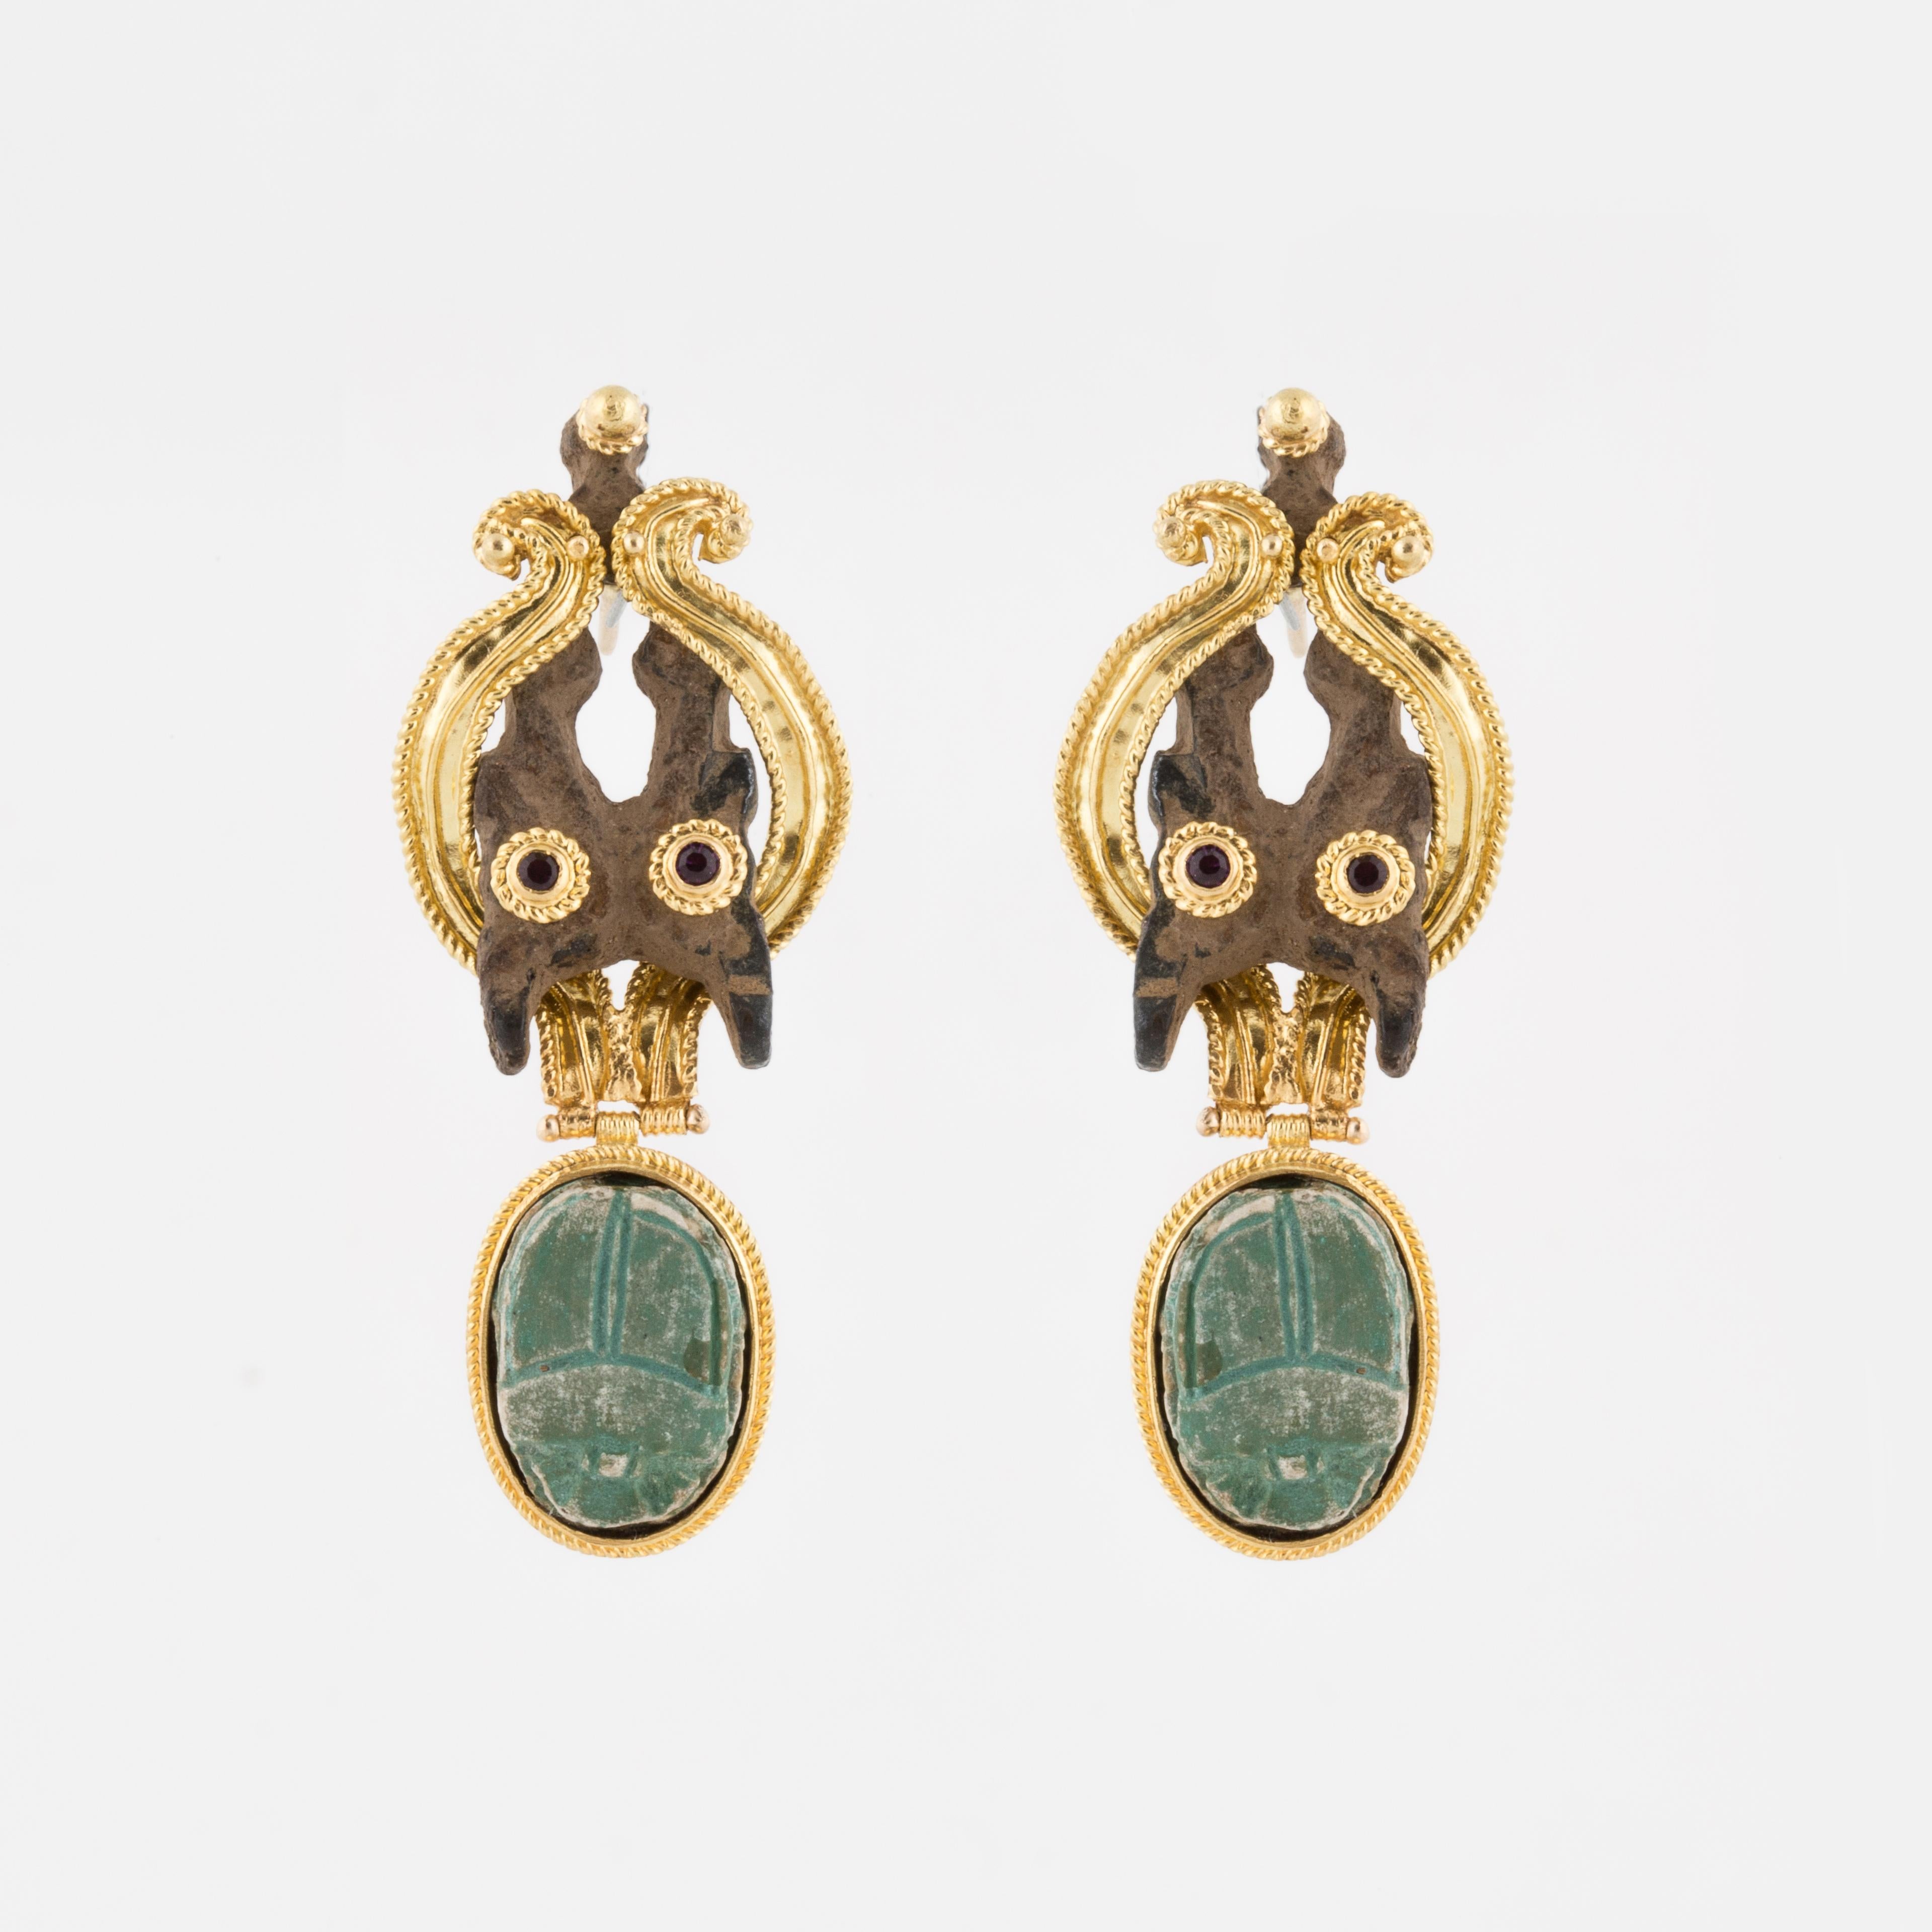 14K yellow gold earrings featuring a faience scarab in each one.  There are also vintage pieces of metal highlighted with two (2) each tourmalines and amethysts.  Beautiful gold work accentuate these Egyptian Revival earrings.  Measure 2-1/6